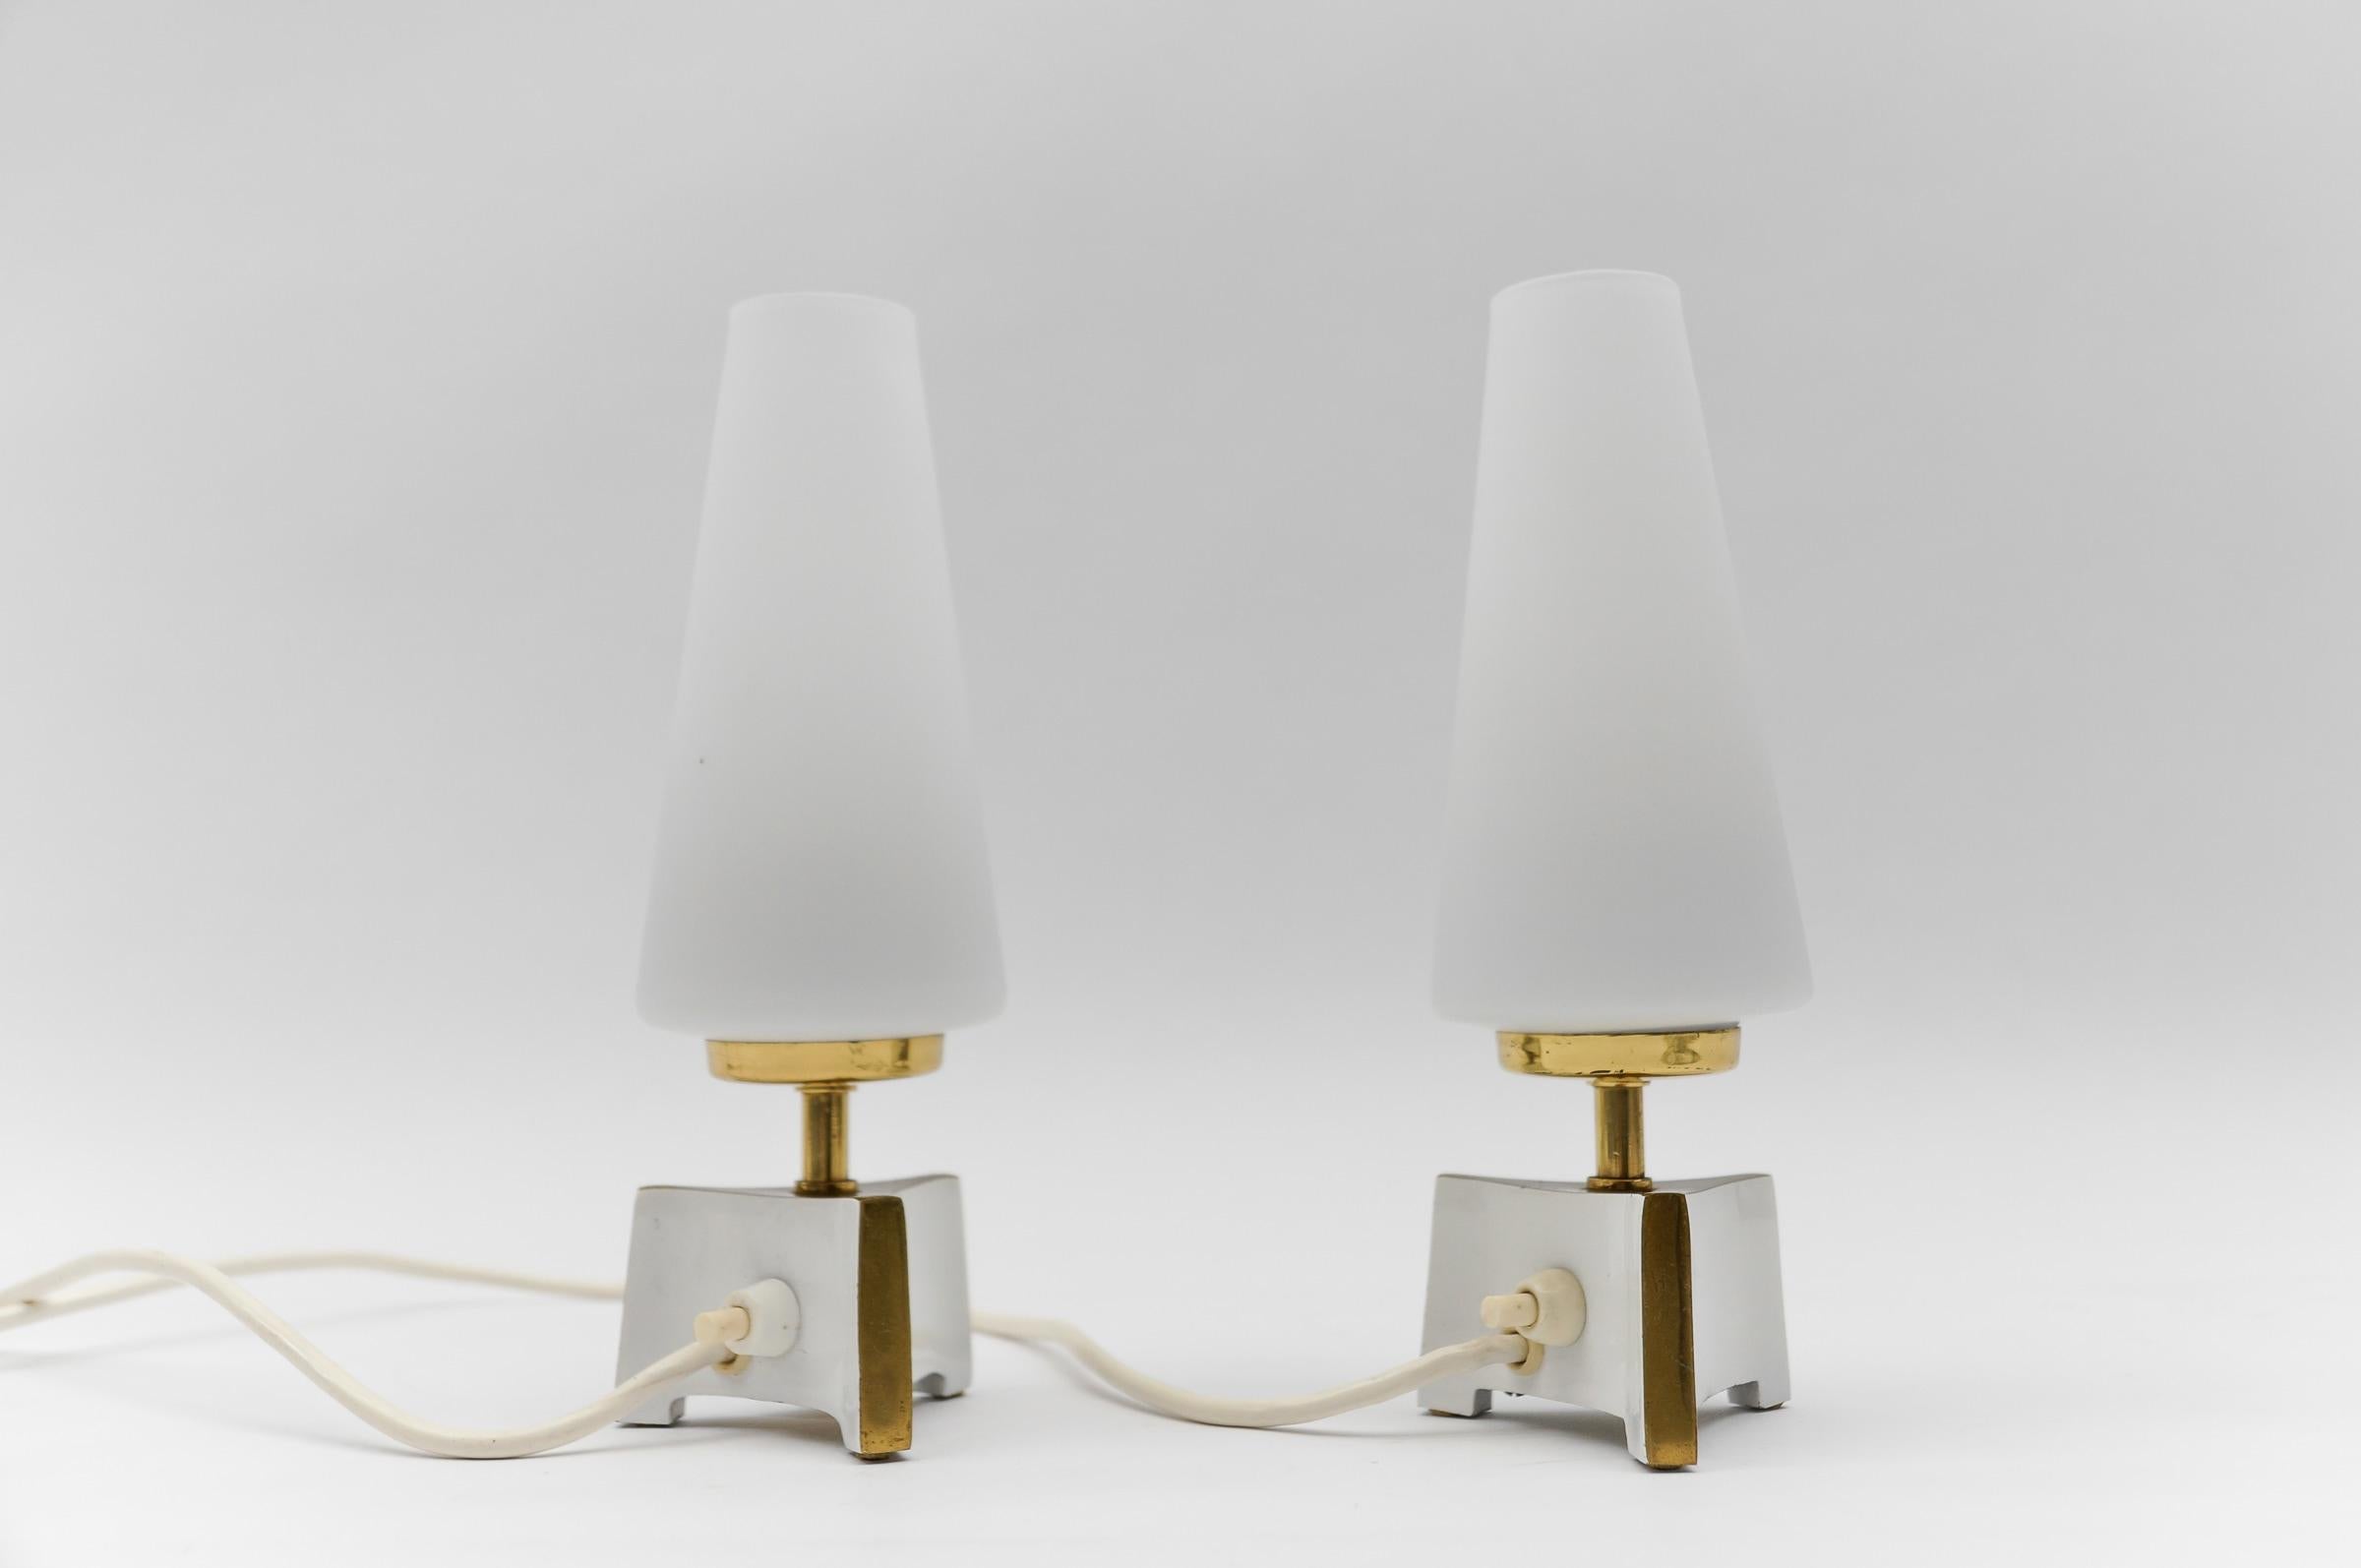 Petite Mid-Century Modern Massive Brass and Opaline Glass Table Lamps, 1950s   In Good Condition For Sale In Nürnberg, Bayern